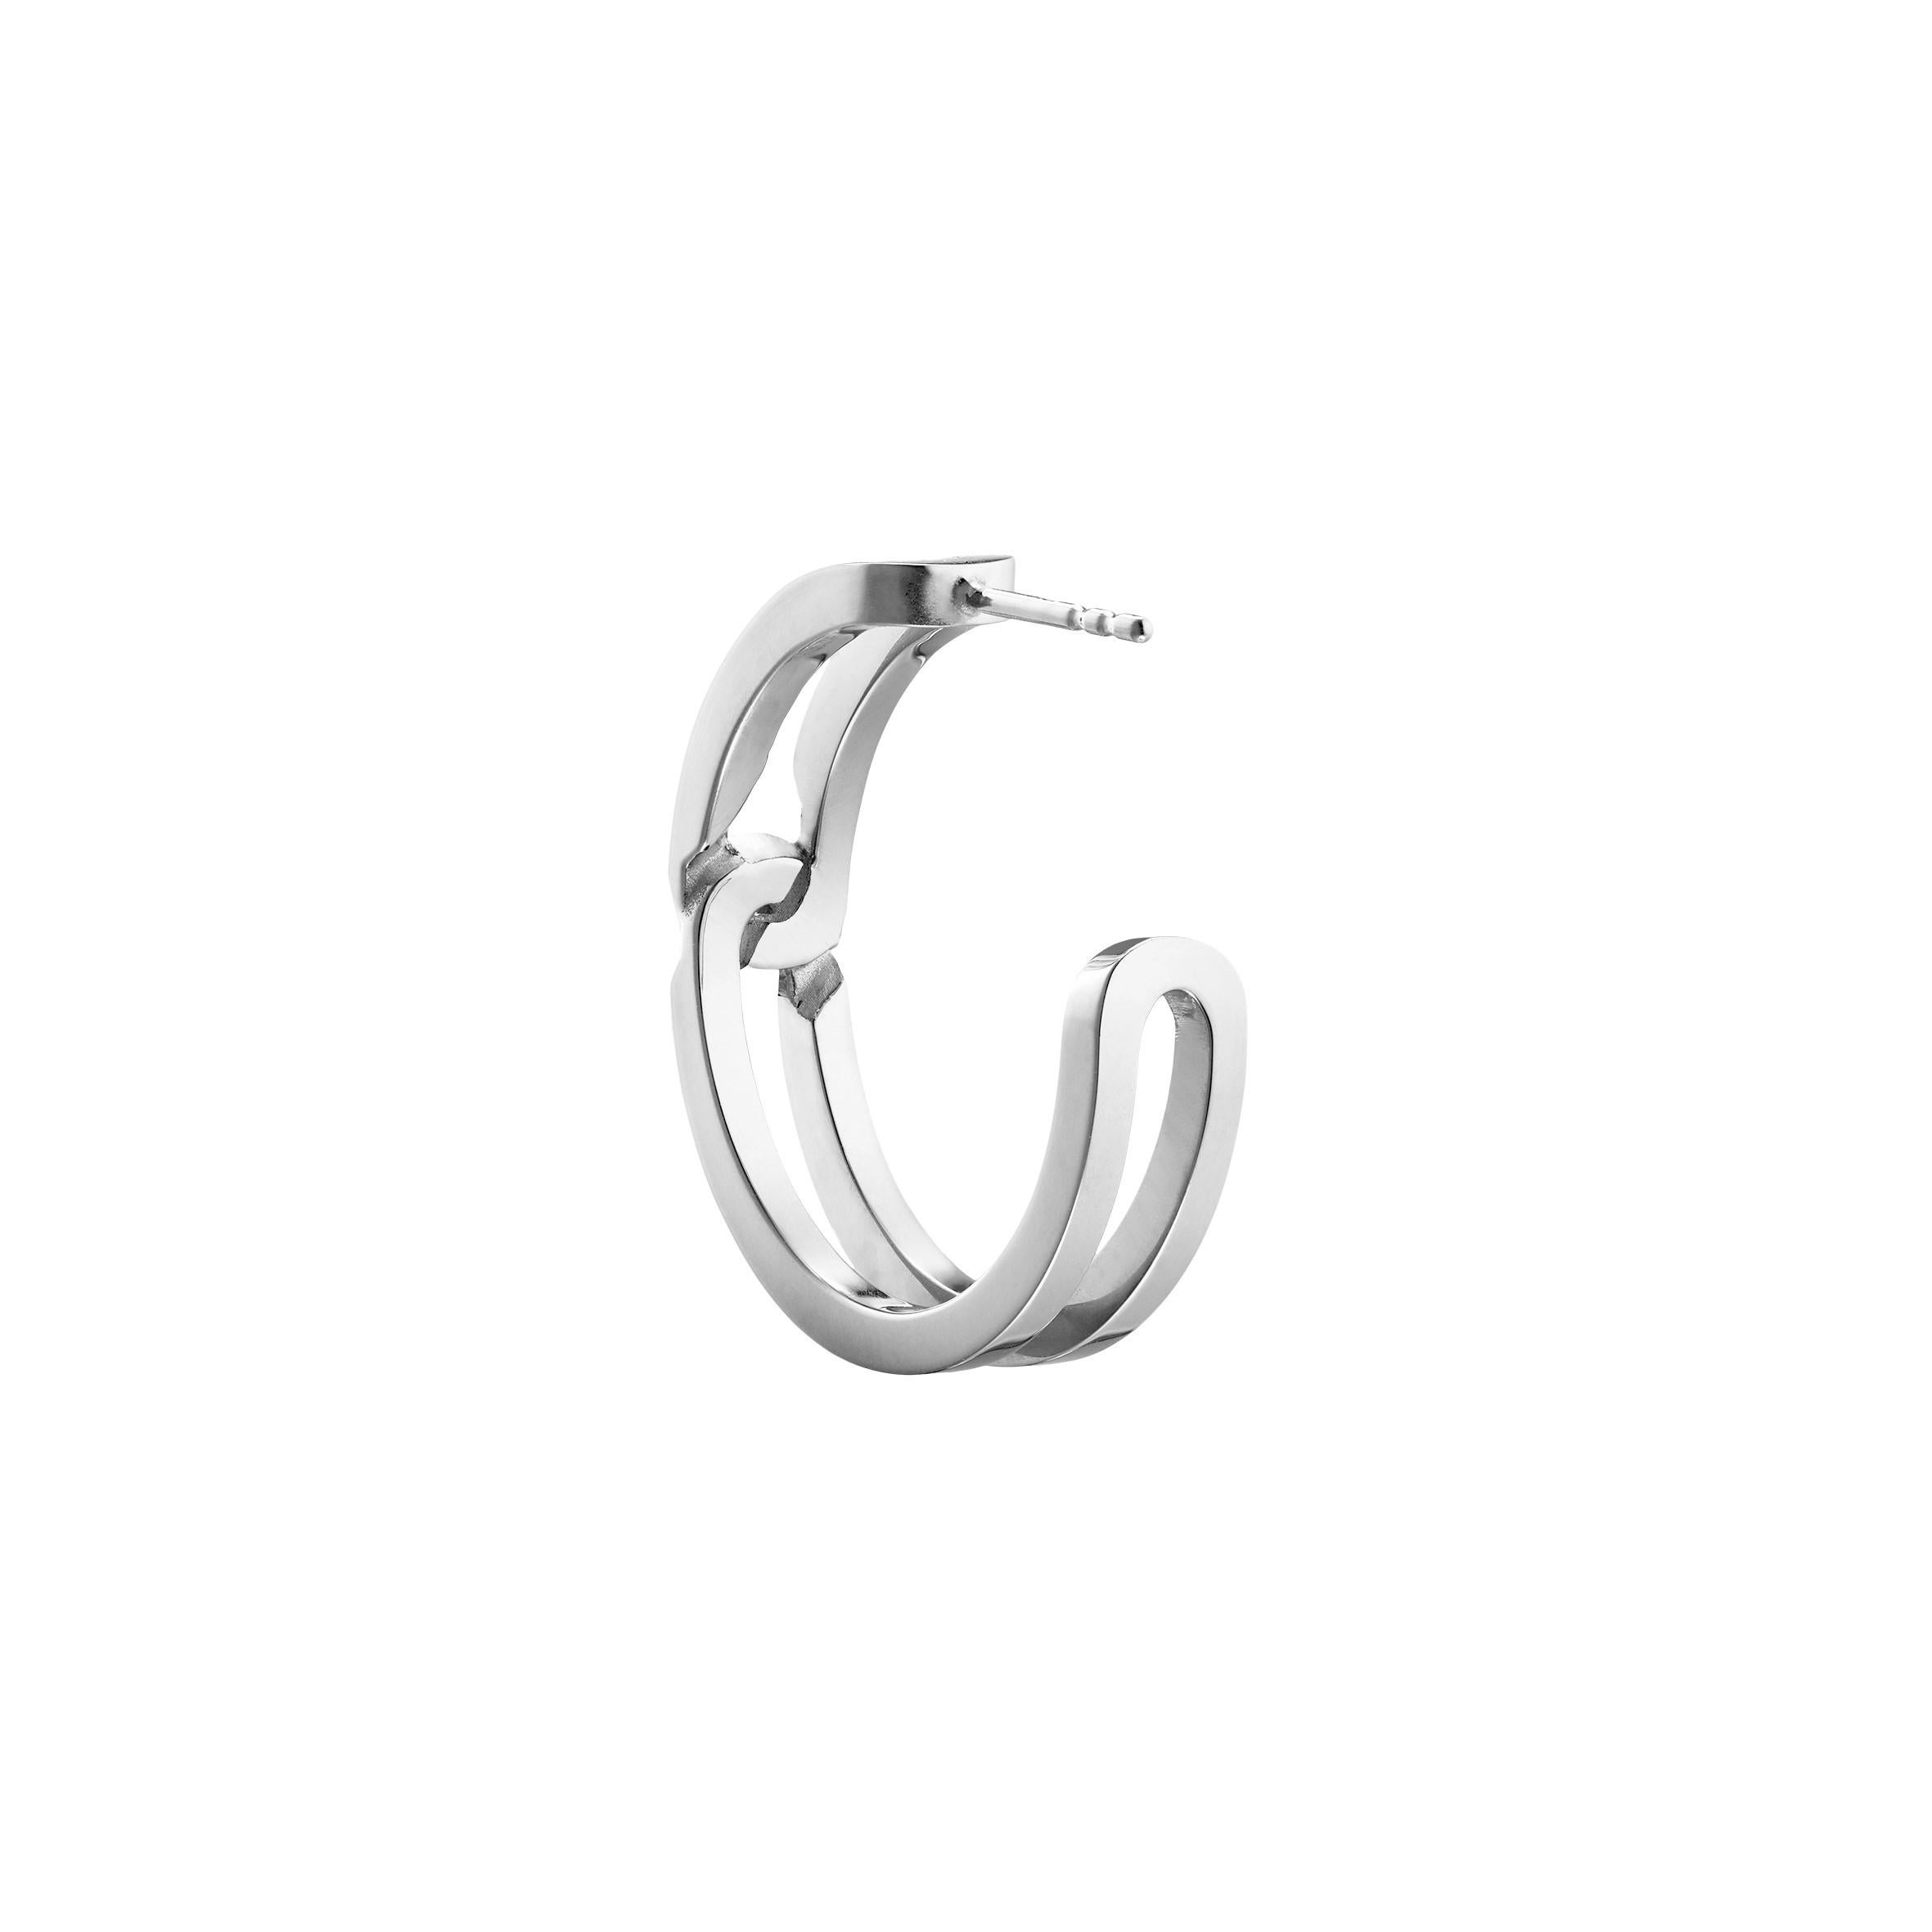 KINRADEN THE GASP LARGE Earring - sterling silver For Sale 1